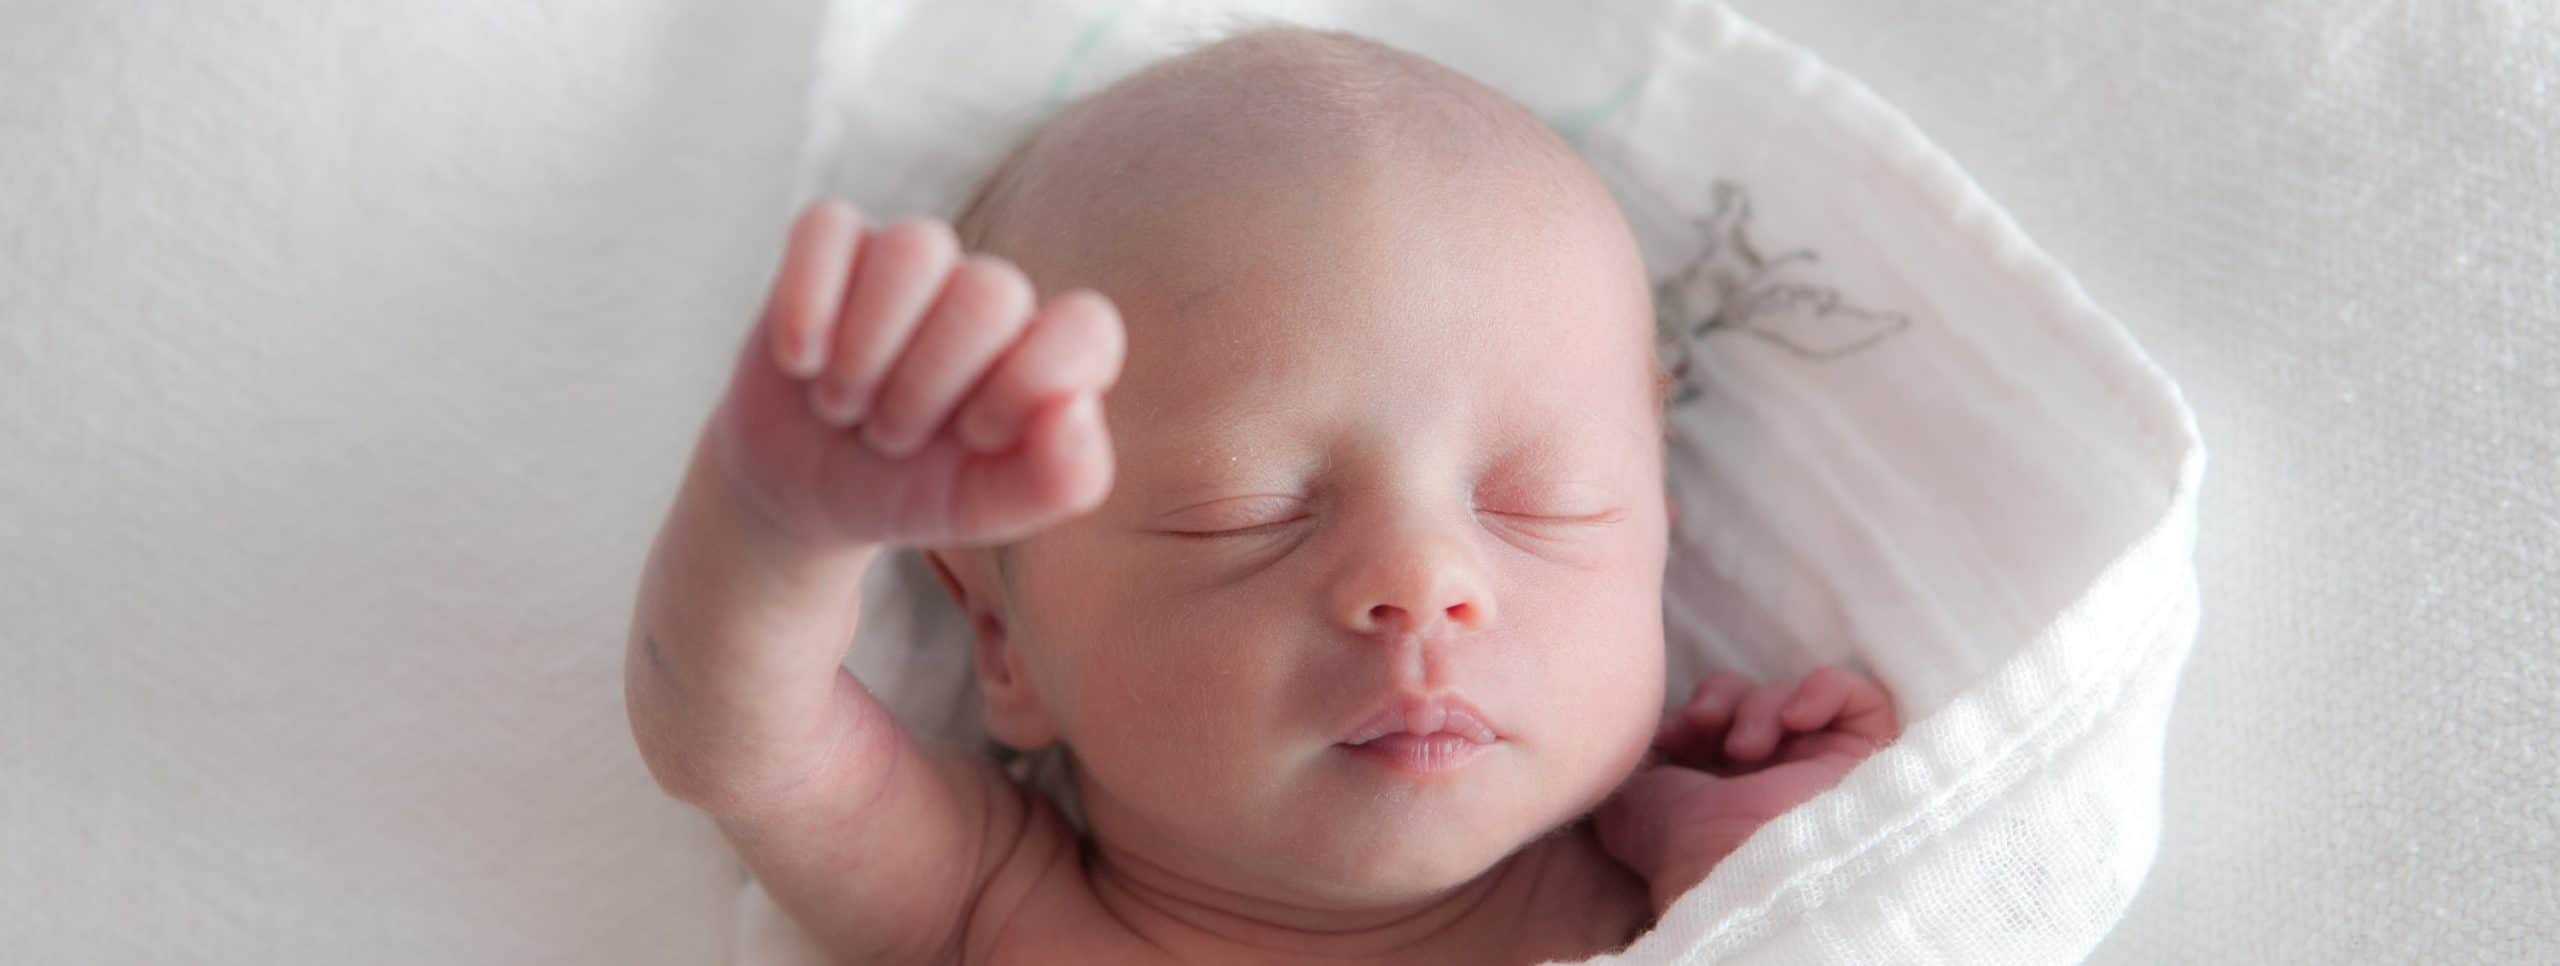 Main photo of baby with hand in the air.